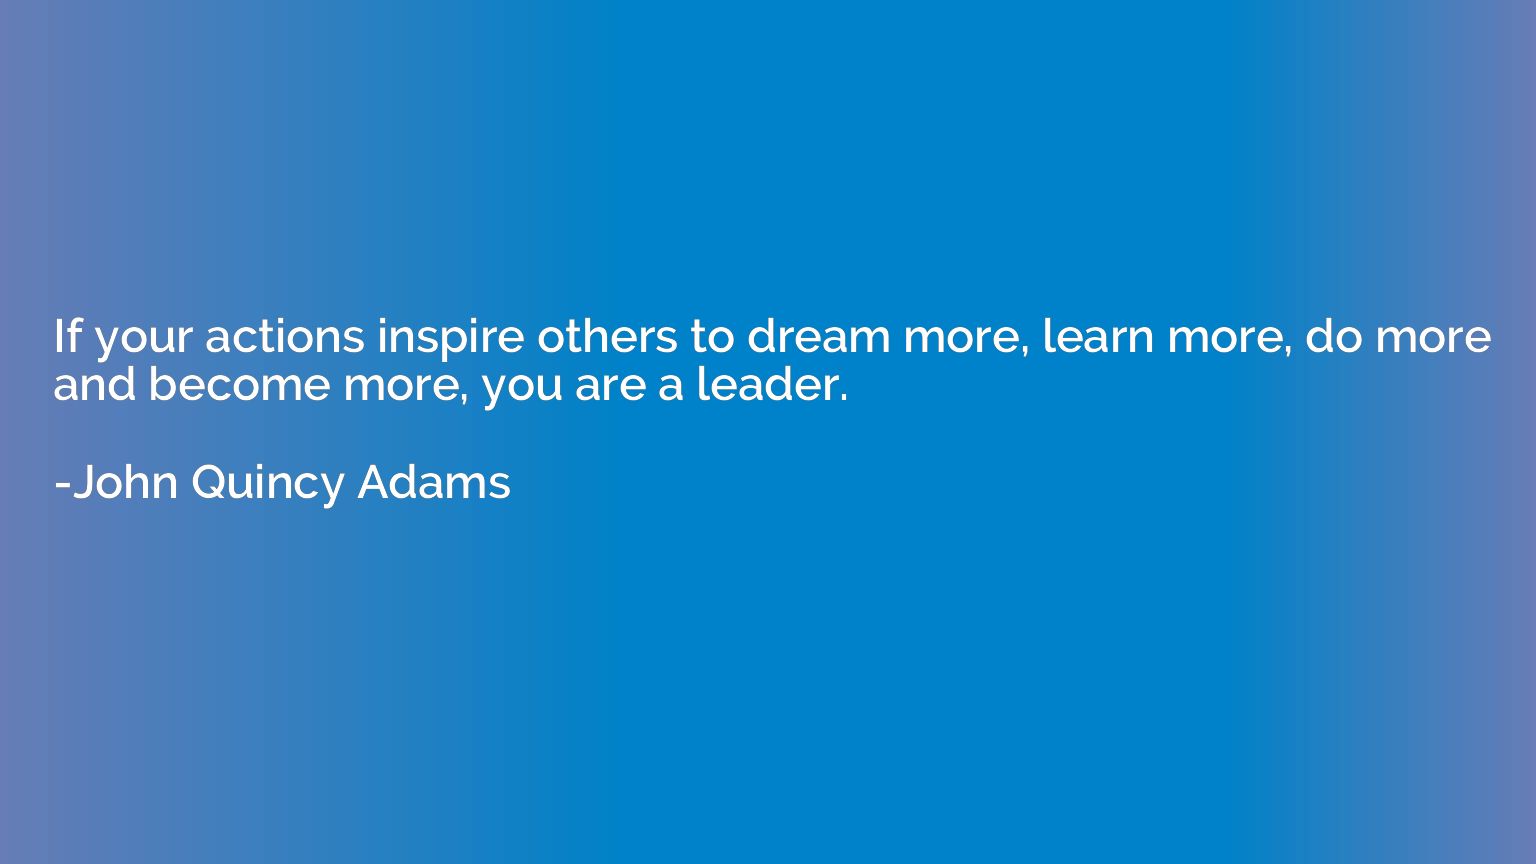 If your actions inspire others to dream more, learn more, do